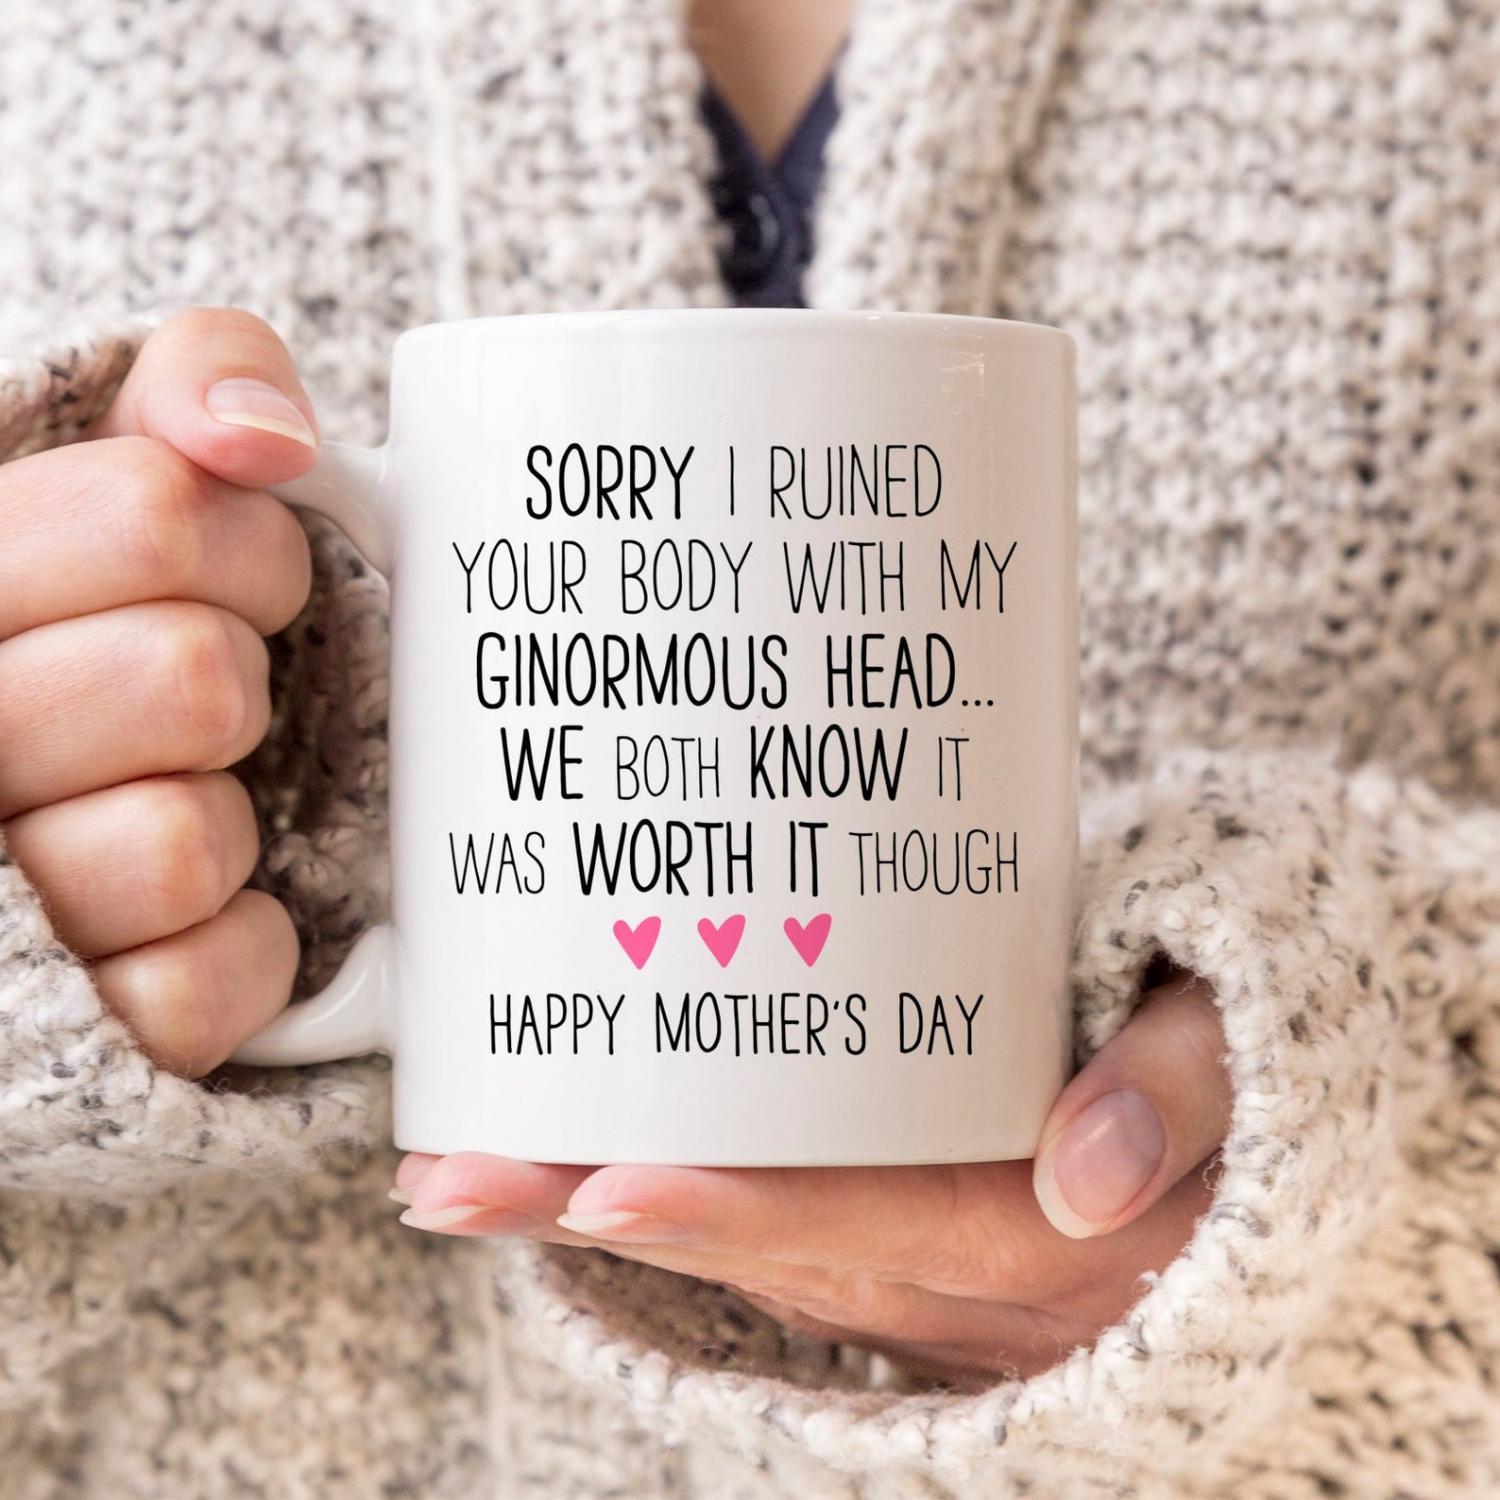 Sorry I ruined your body with my ginormous head, we both know it was worth it though - Happy Mother's Day - Funny mothers day coffee mug